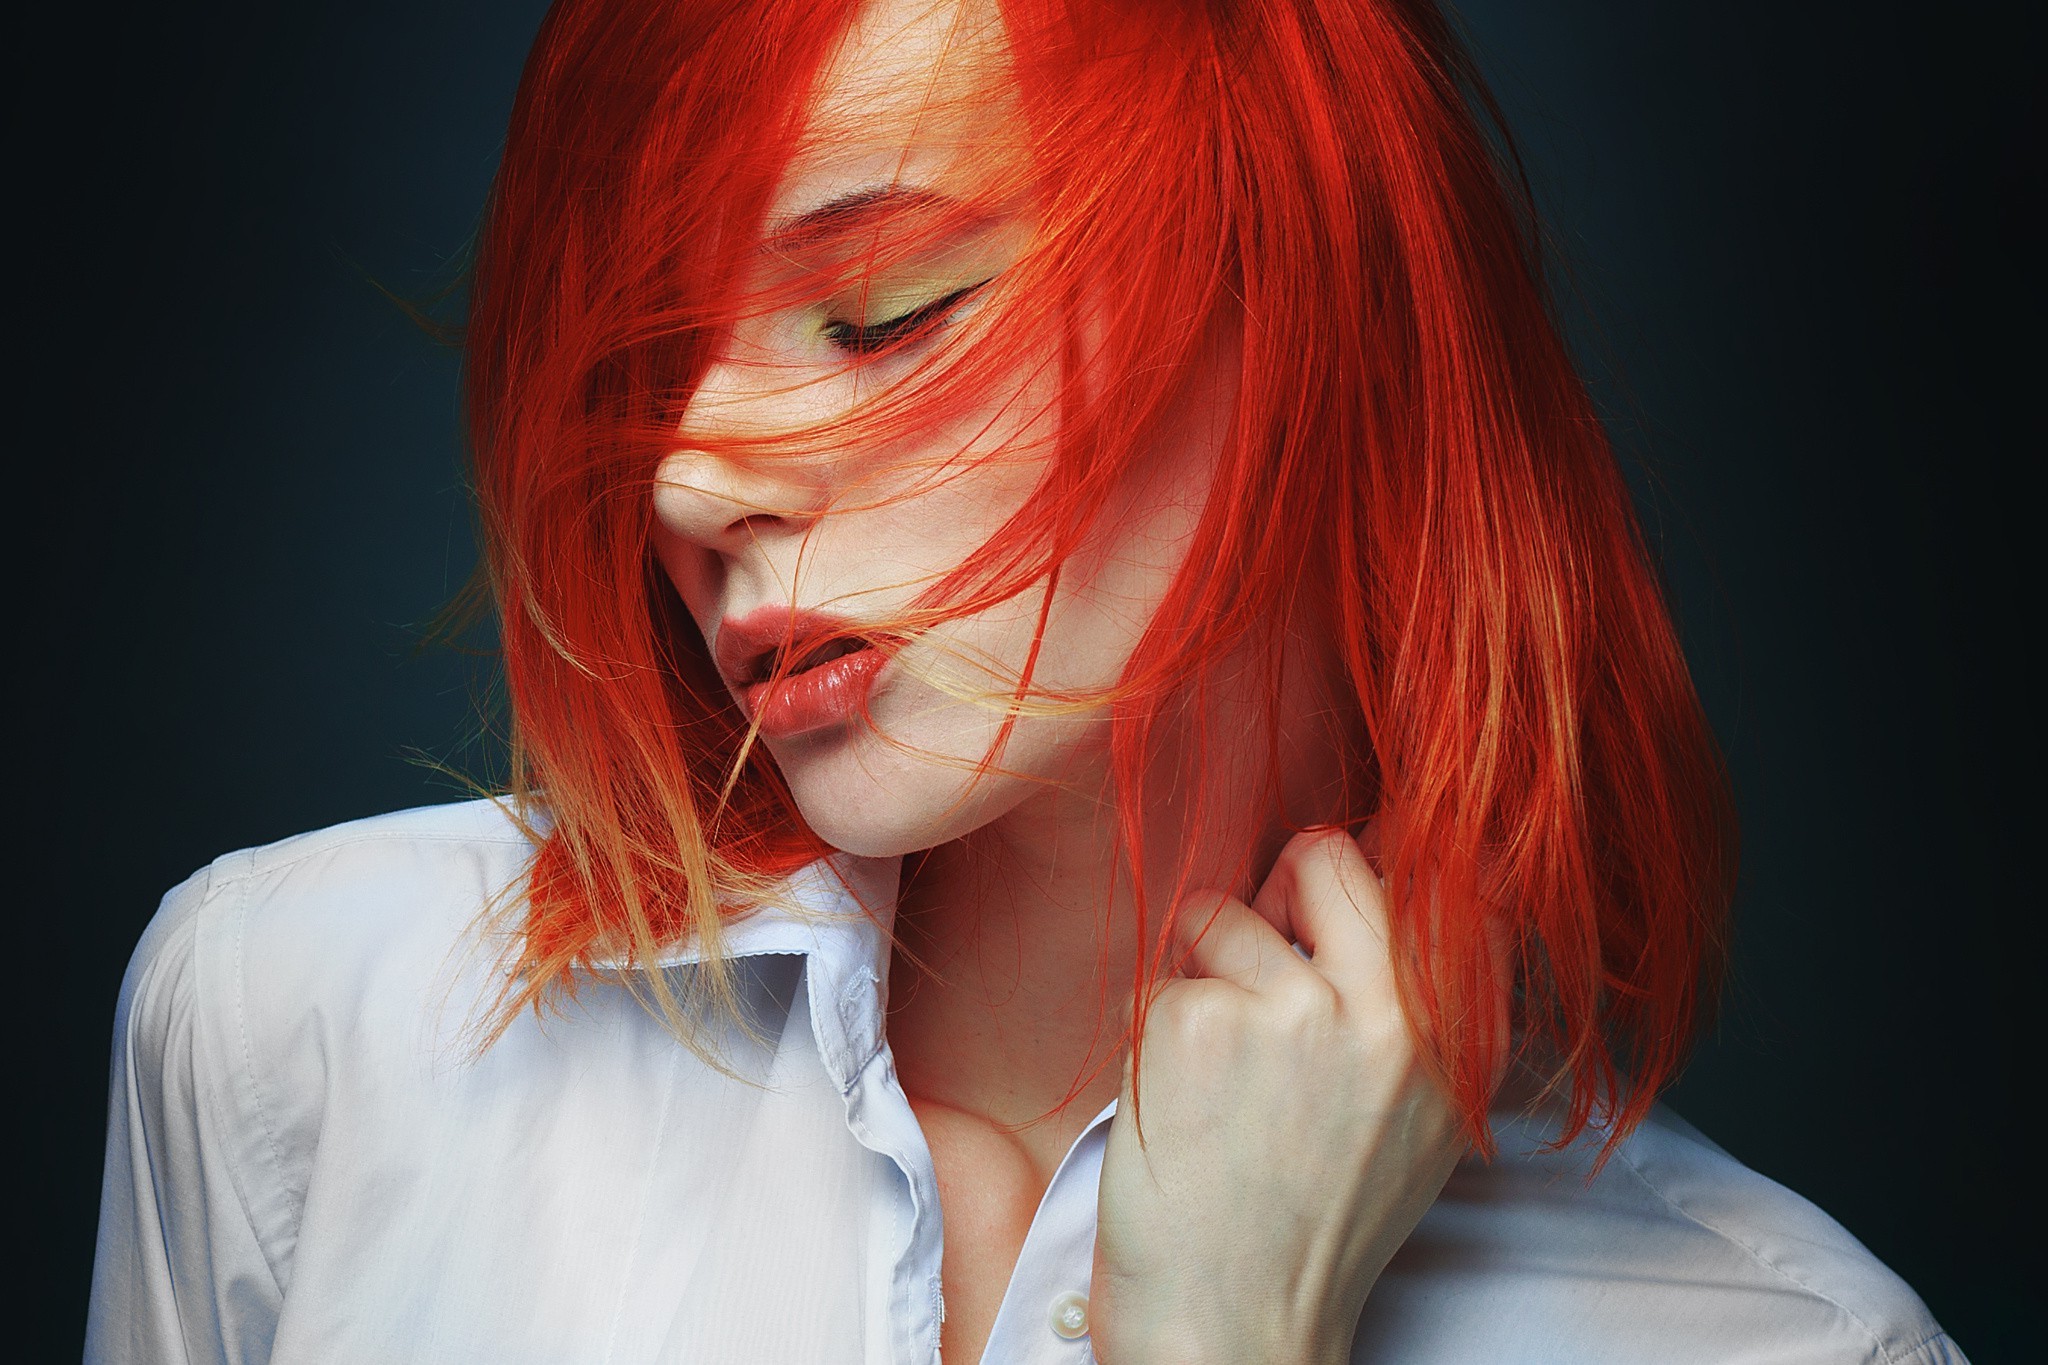 women, Model, Face, Portrait, Redhead, Dyed Hair, Simple Background, Closed Eyes Wallpaper